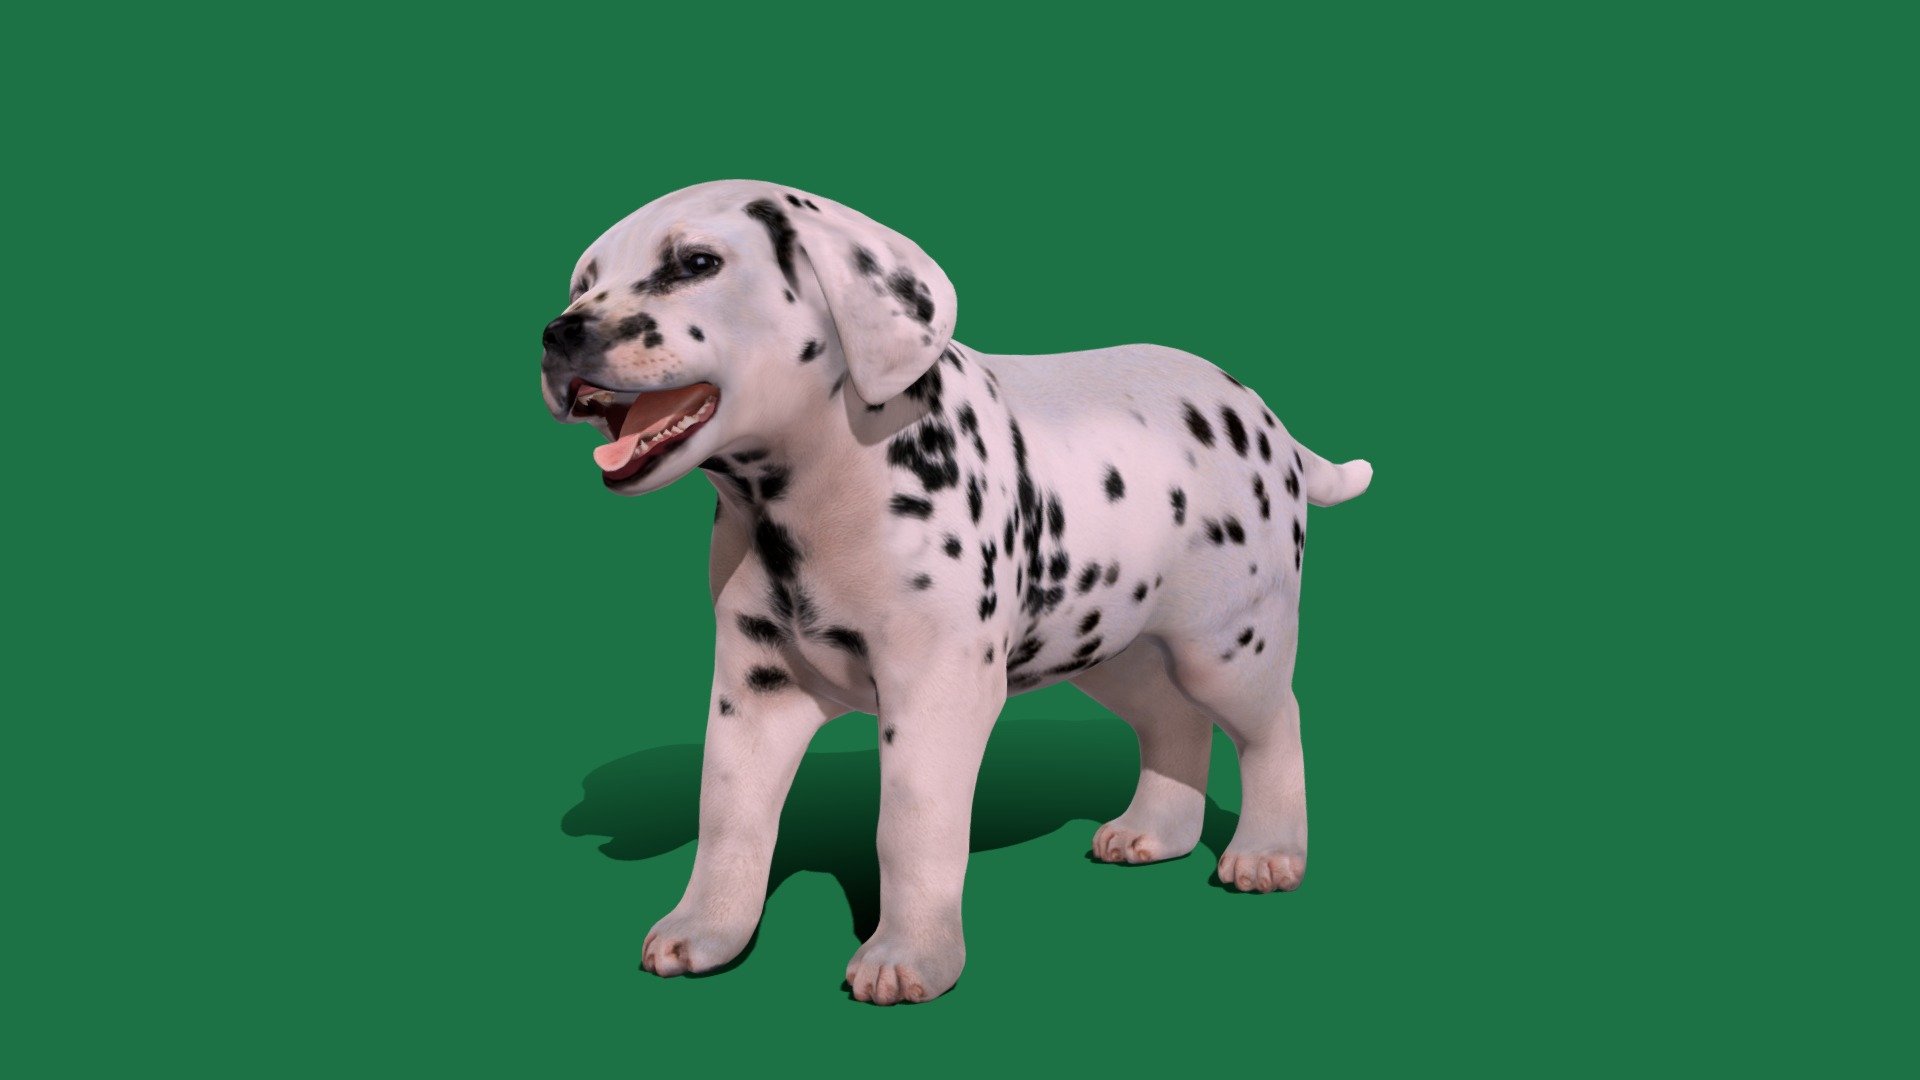 Dalmatian Dog Breed(Puppy) Croatia,Dalmatia

Canis lupus familiaris Animal Mammal(hunting Dog)Cute,Pet

1 Draw Calls

MidPoly

Game Ready(Character)

Subdivision Surface Ready

15-Animations 

4K PBR Textures 1 Material

Unreal/Unity FBX 

Blend File 3.6.5 LTS/4 Plus

USDZ File(AR Ready). Real Scale Dimension (Xcode ,Reality Composer, Keynote Ready)

Textures File


GLB/GlTF  (Unreal 5.1 Plus Native Support,Godot,Spark AR,Lens Studio,Effector,Spline,Play Canvas,Omniverse,GDevelop-5,BuildBox)




Triangles -31090



Faces -16590

Edges -32243

Vertices -15658

Diffuse,Metallic,Roughness,Normal Map,Specular Map,AO

Dalmatian puppies are born white and usually develop spots around four weeks old.known for their white coats with dark spots,come in black, white or liver and white color combinations.The Dalmatian is a breed of dog with a white coat marked with dark-coloured spots. Originally bred as a hunting dog, it was  used as a carriage dog in its early days 3d model